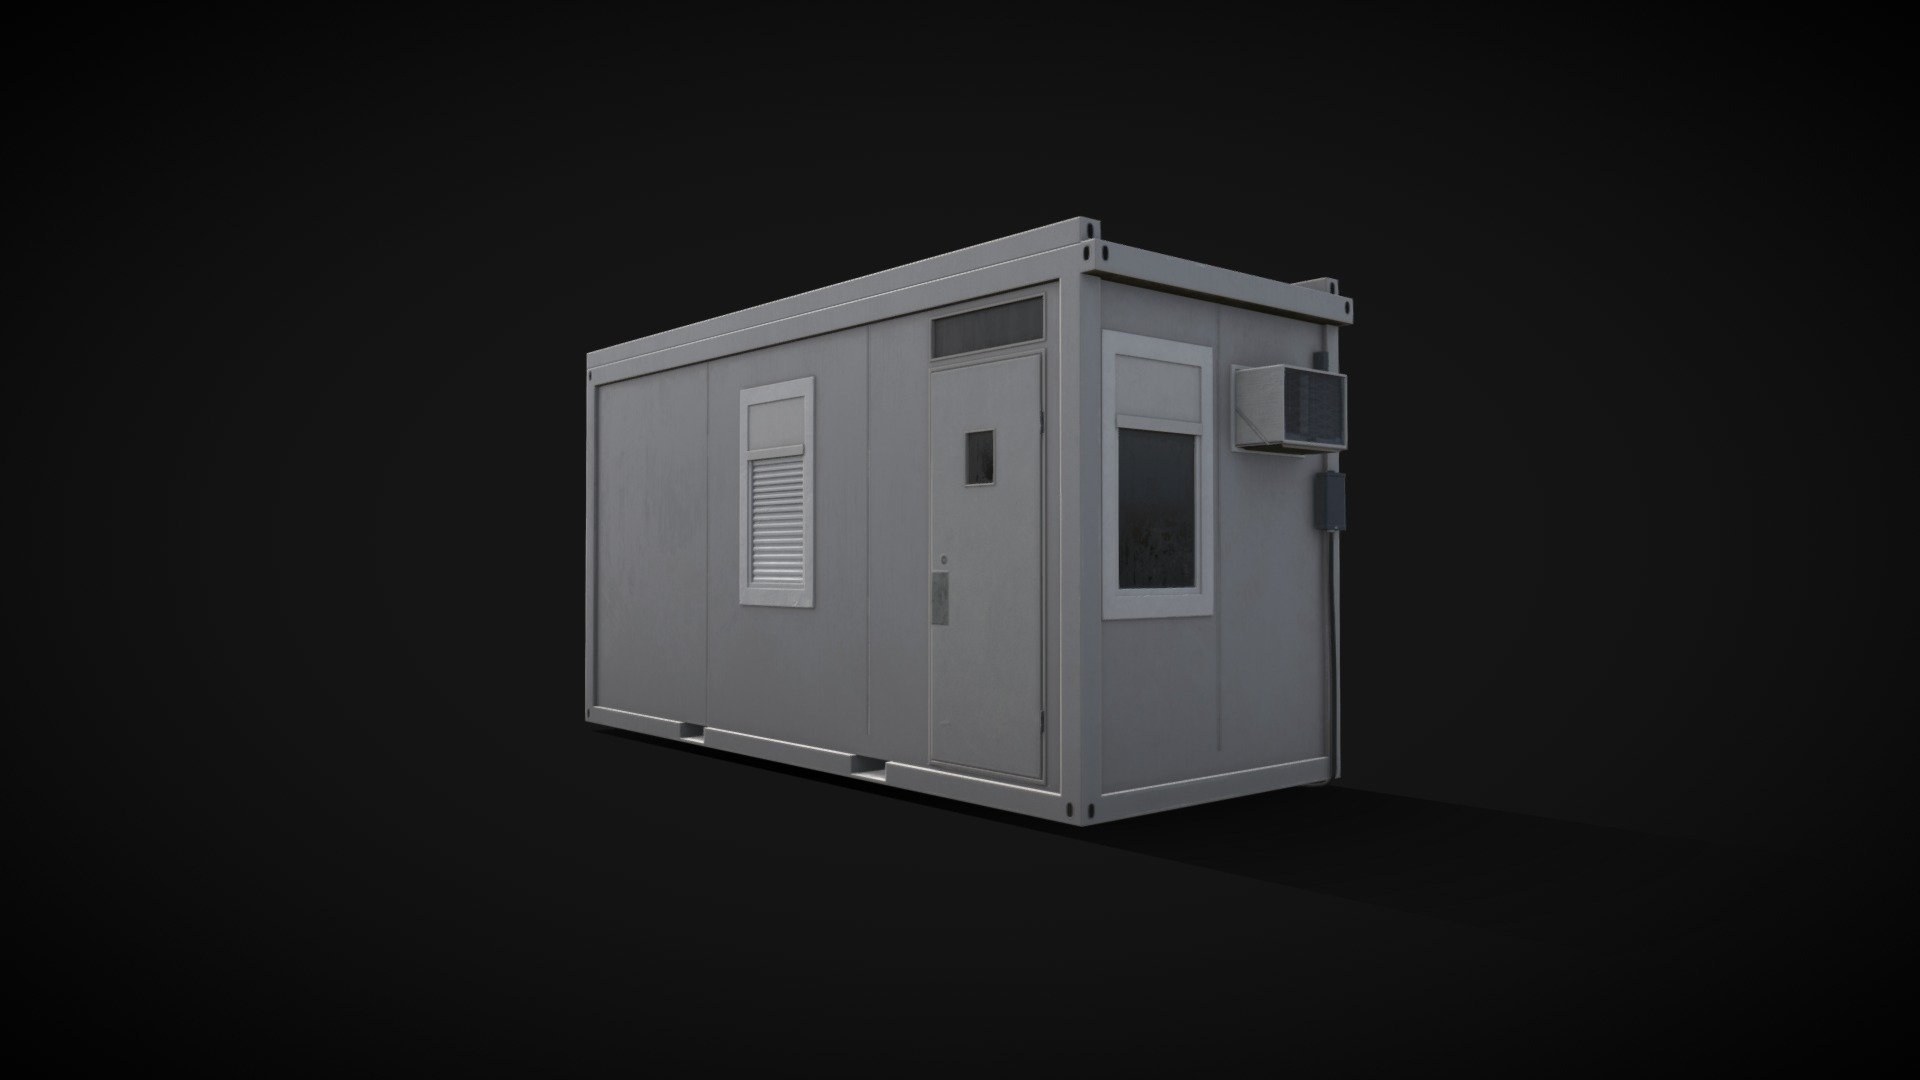 Gotta stack &lsquo;em all! These units can be in your digital scene quickly, perfectly configured and outfitted with everything you need, from polygons to textures to PBR materials, so your people can get in and get right to work. Quickly build a midular field office and fill up any empty lots in your scene 3d model